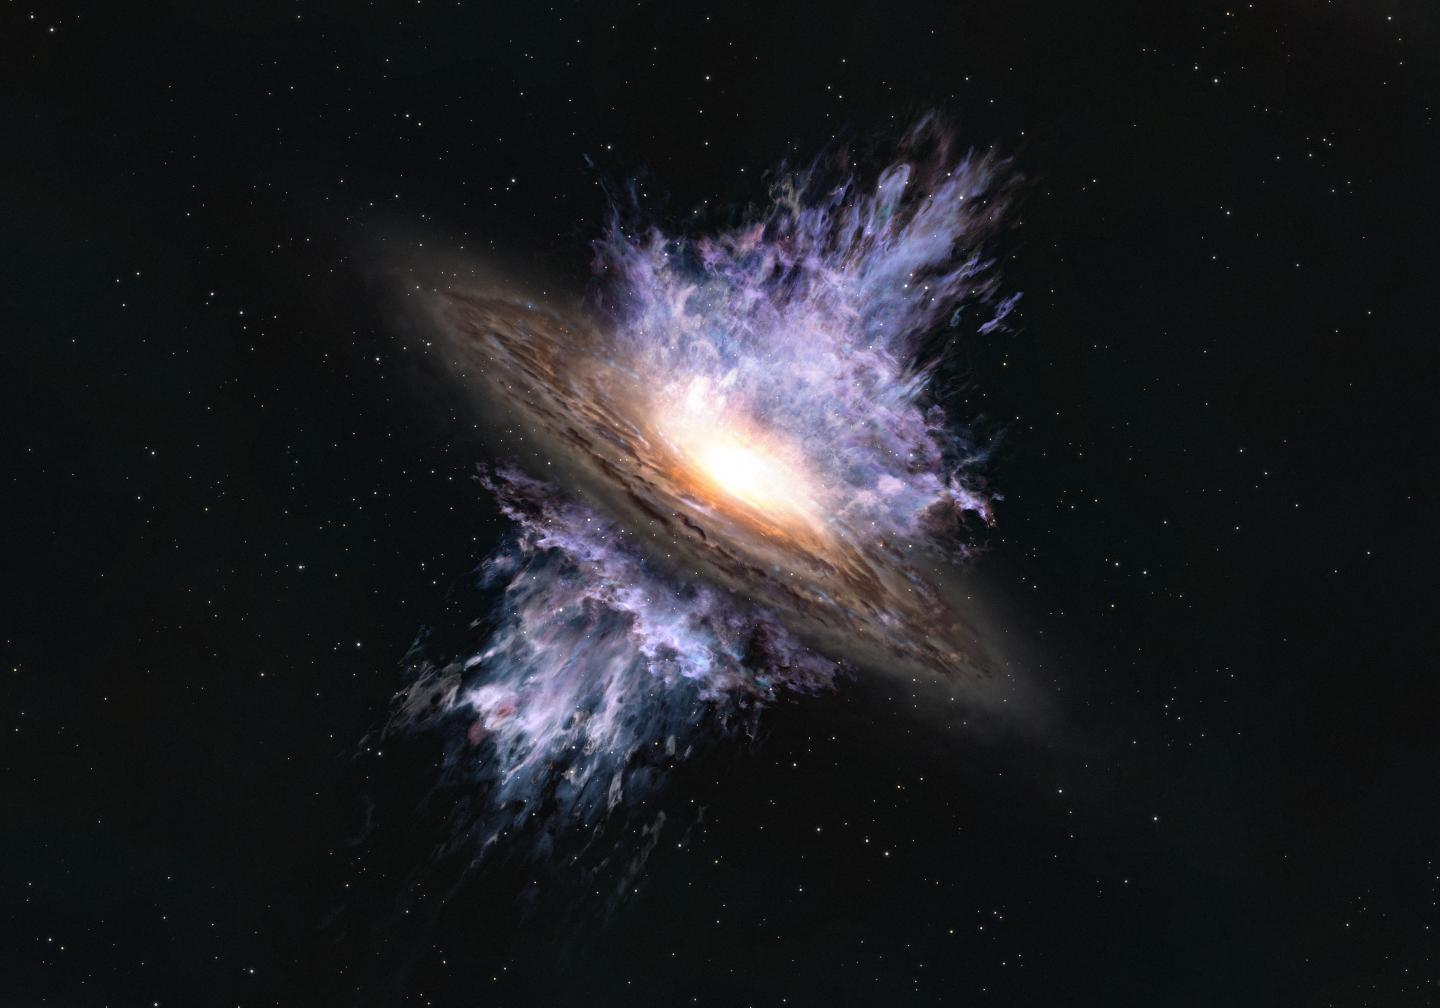 Artist's impression of a galactic wind